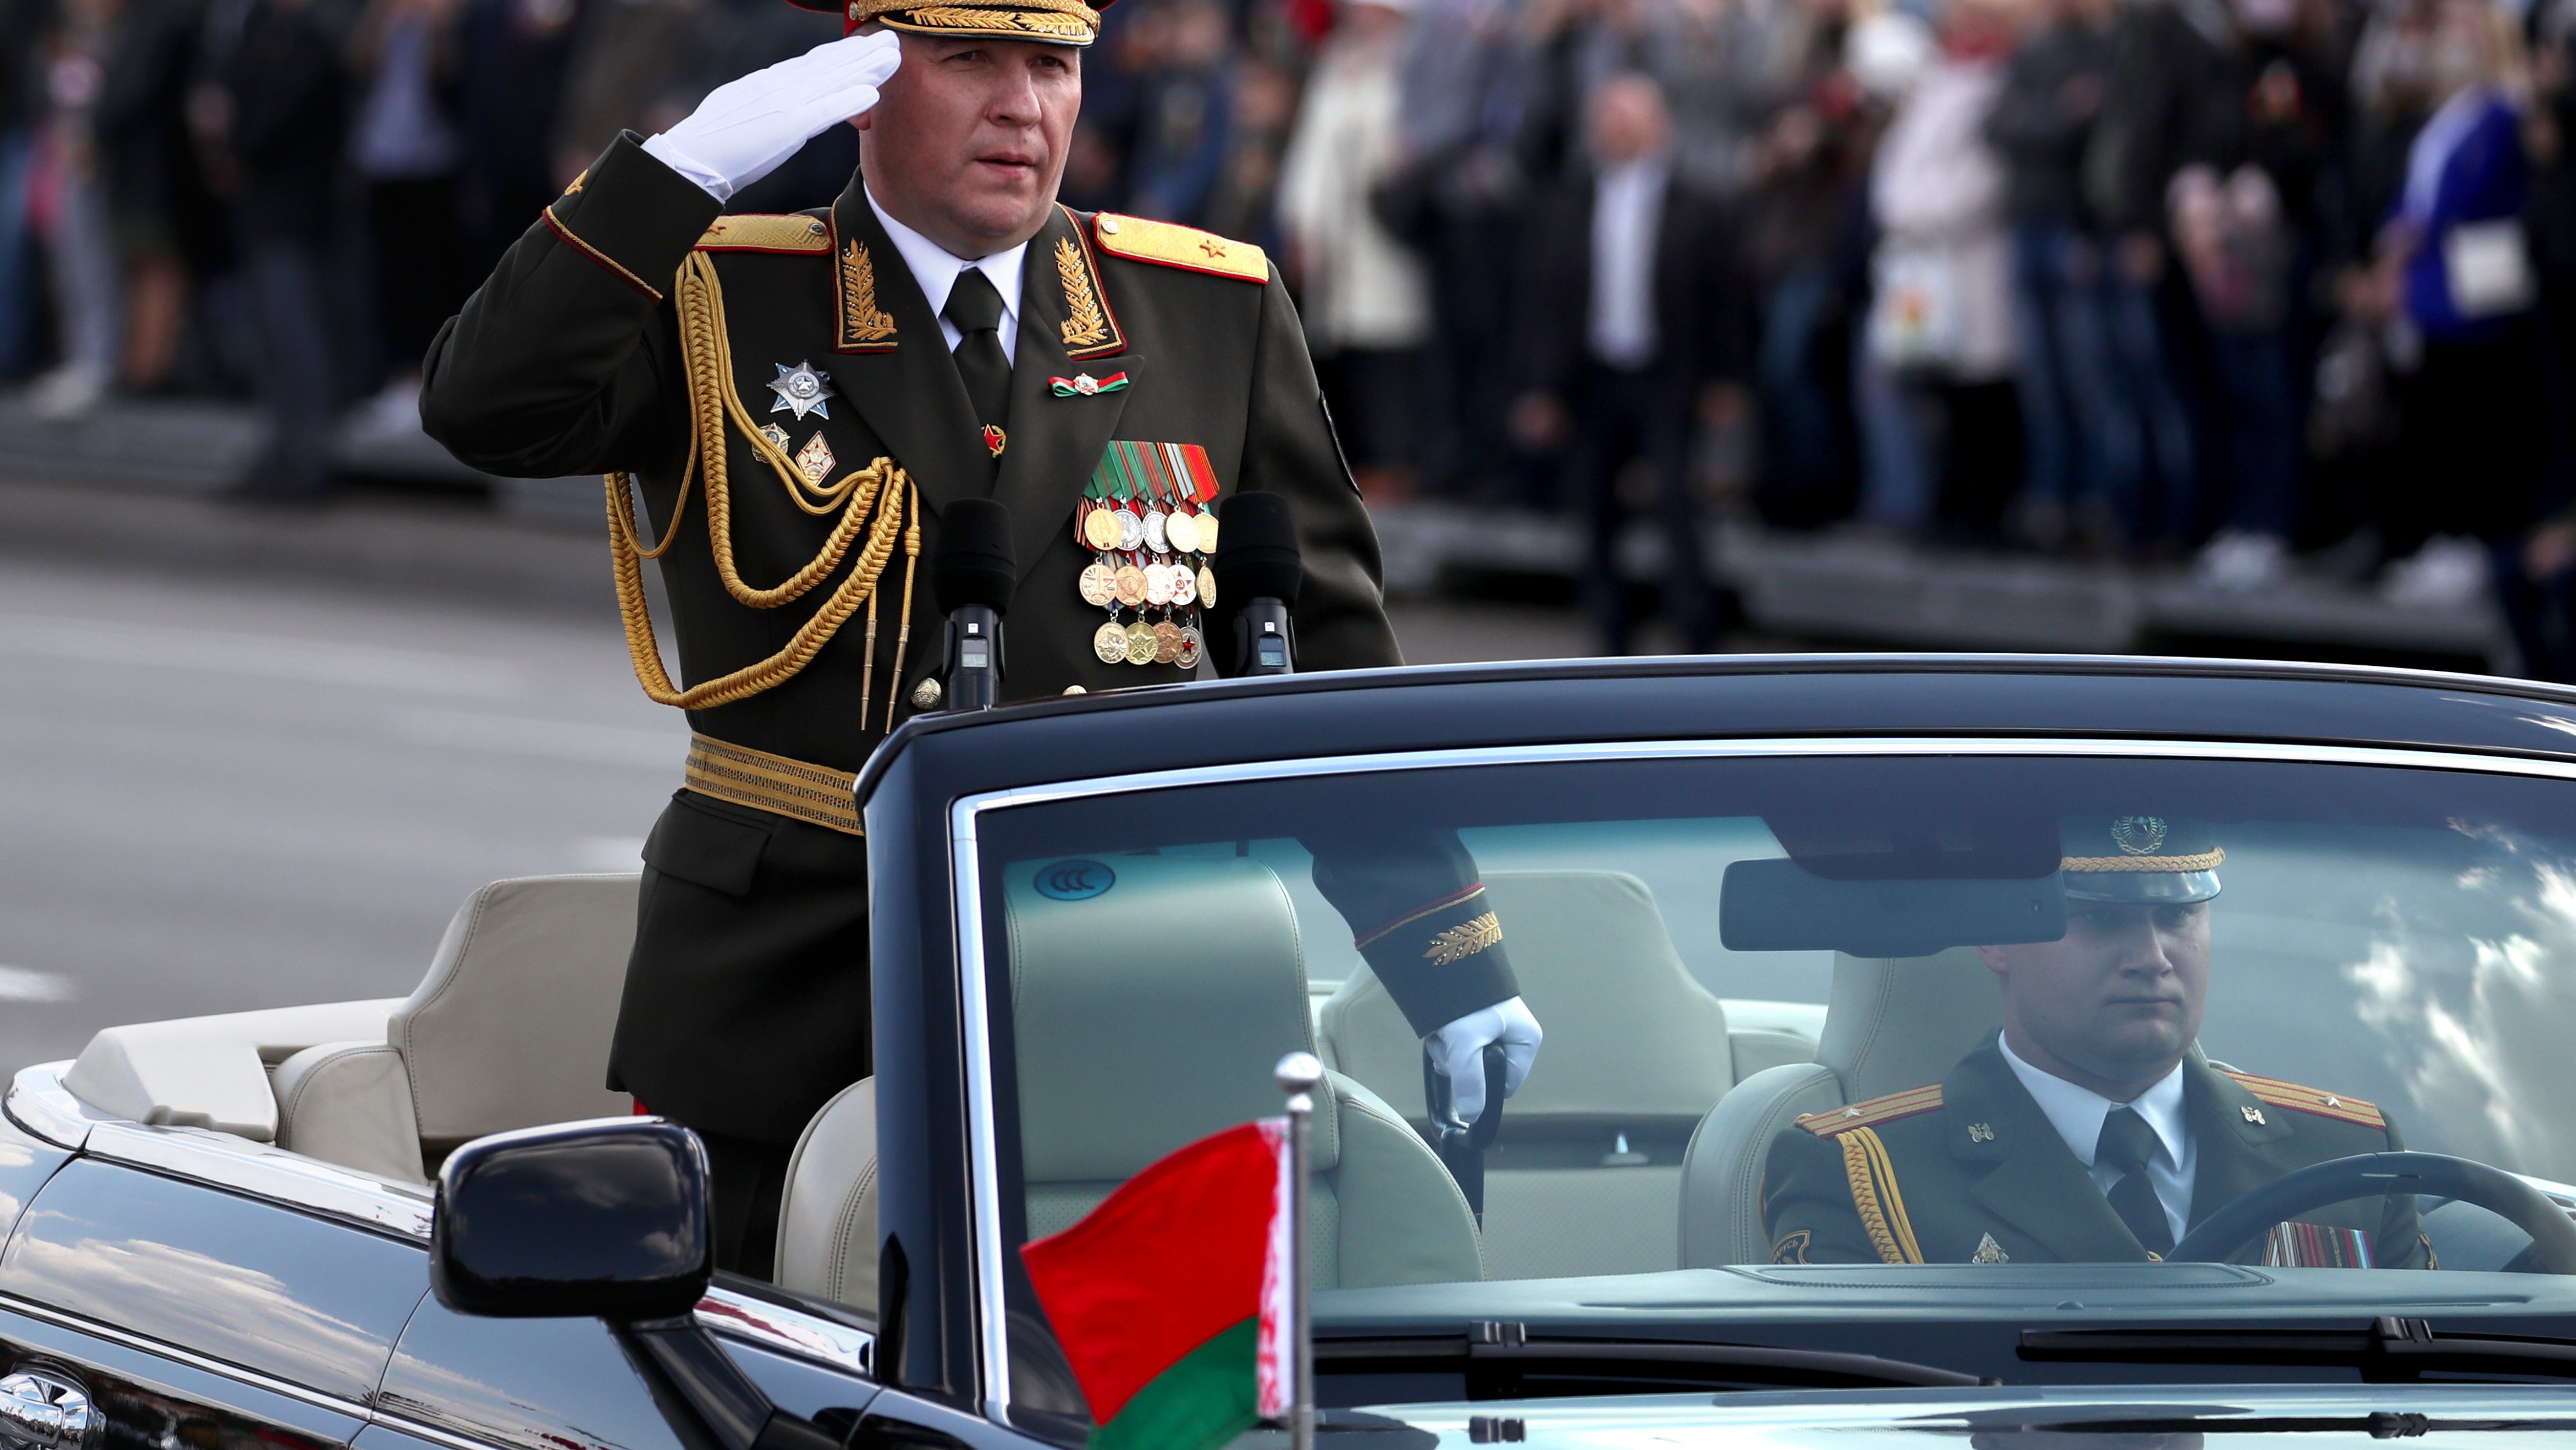 Victory Day military parade in Minsk, Belarus